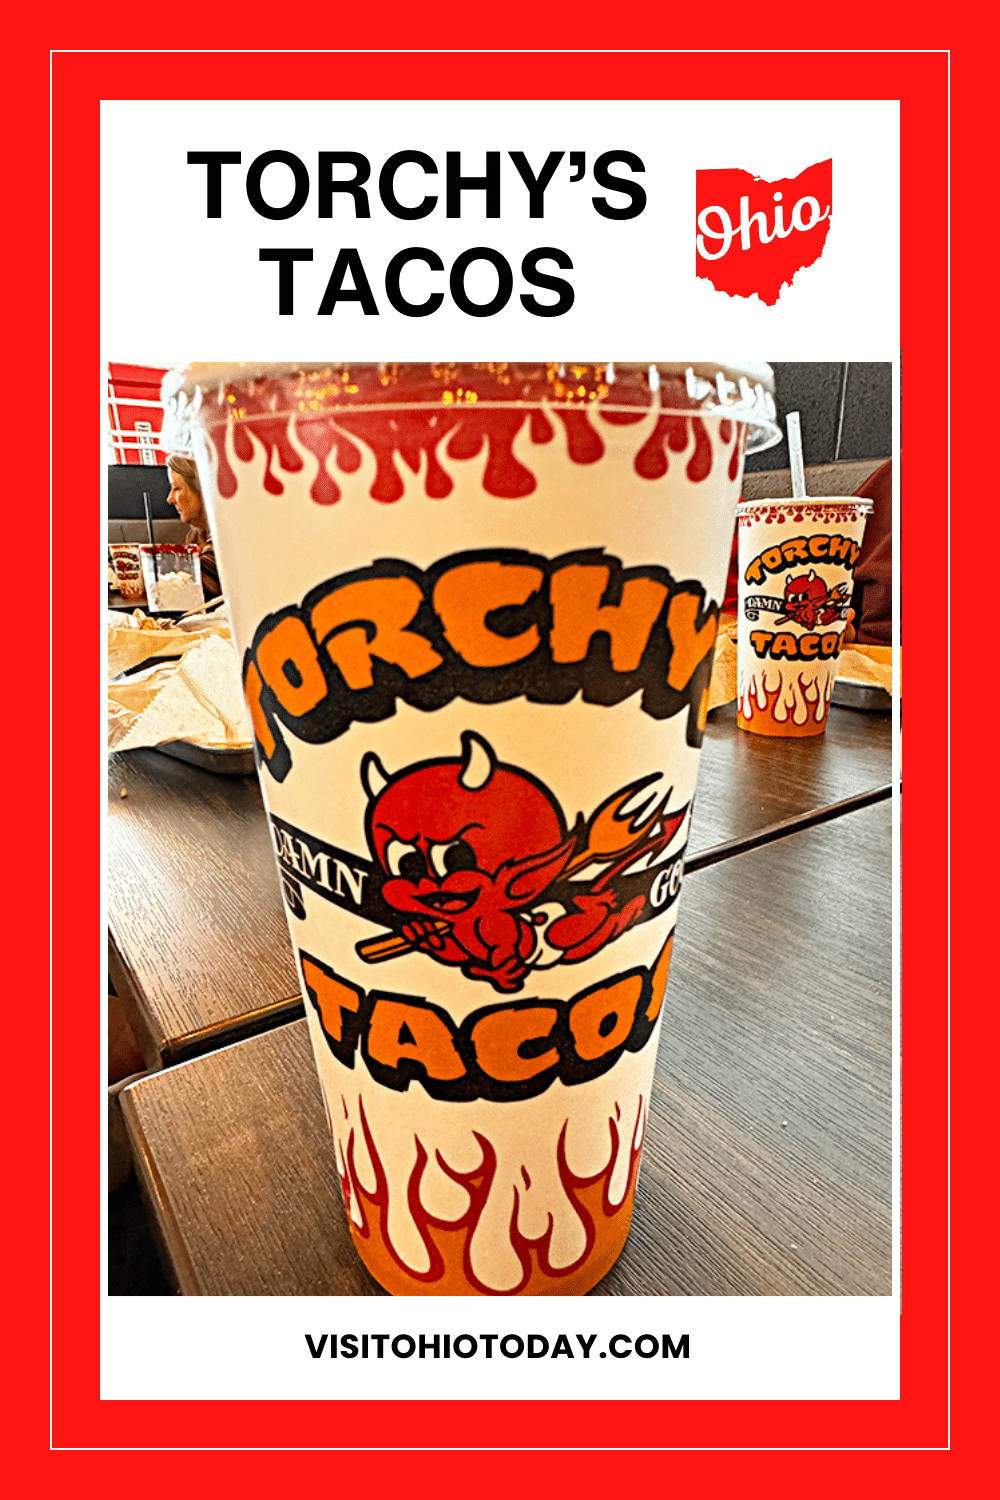 🌮🎉 Indulge in the mouthwatering selection of inventive tacos at Torchy's Tacos in New Albany, crafted with fresh, locally-sourced ingredients and bursting with flavor. From classics like the Trailer Park to bold specialties like the Brushfire, there's something for every craving. Swing by for a taste of Texas with a twist.